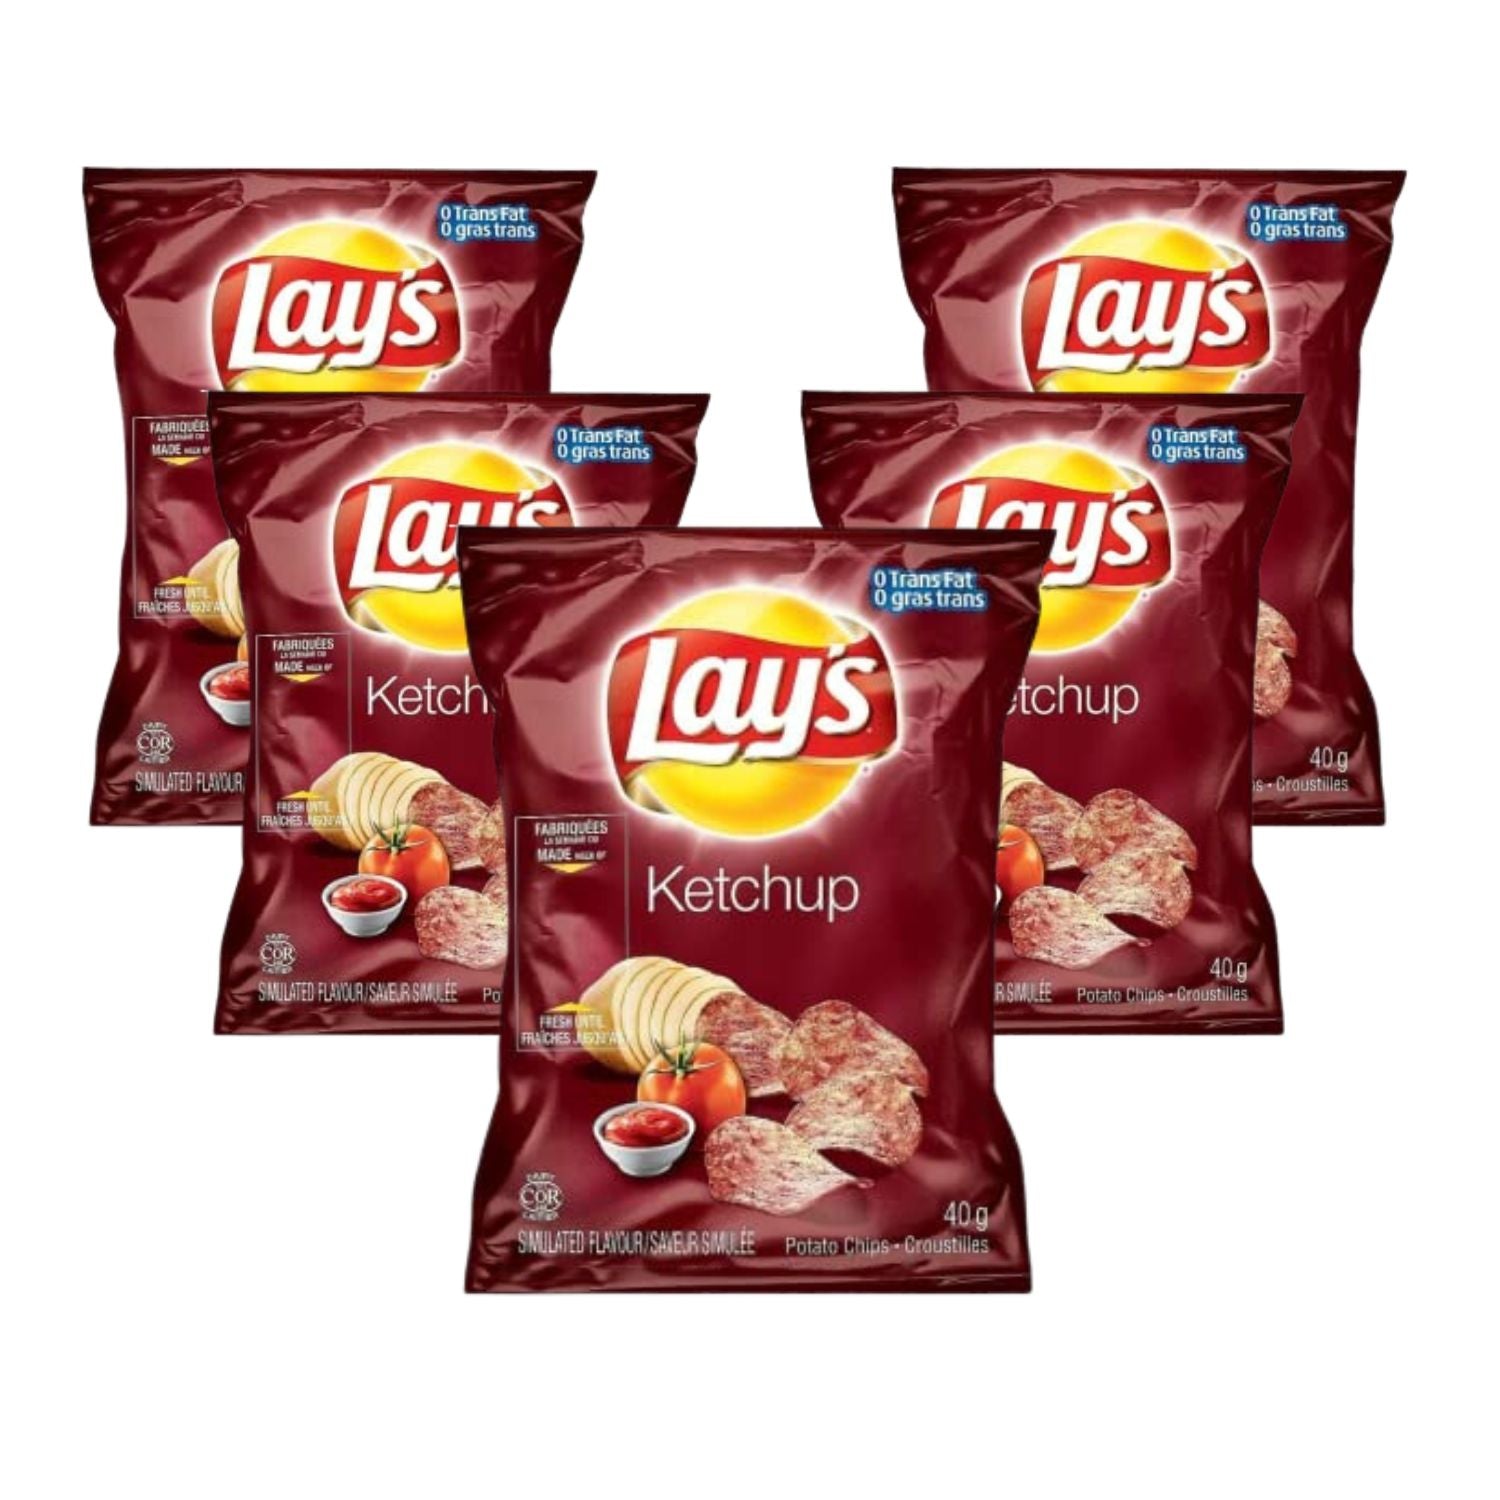 Lays Ketchup Potato Chips Snack Bag pack of 5